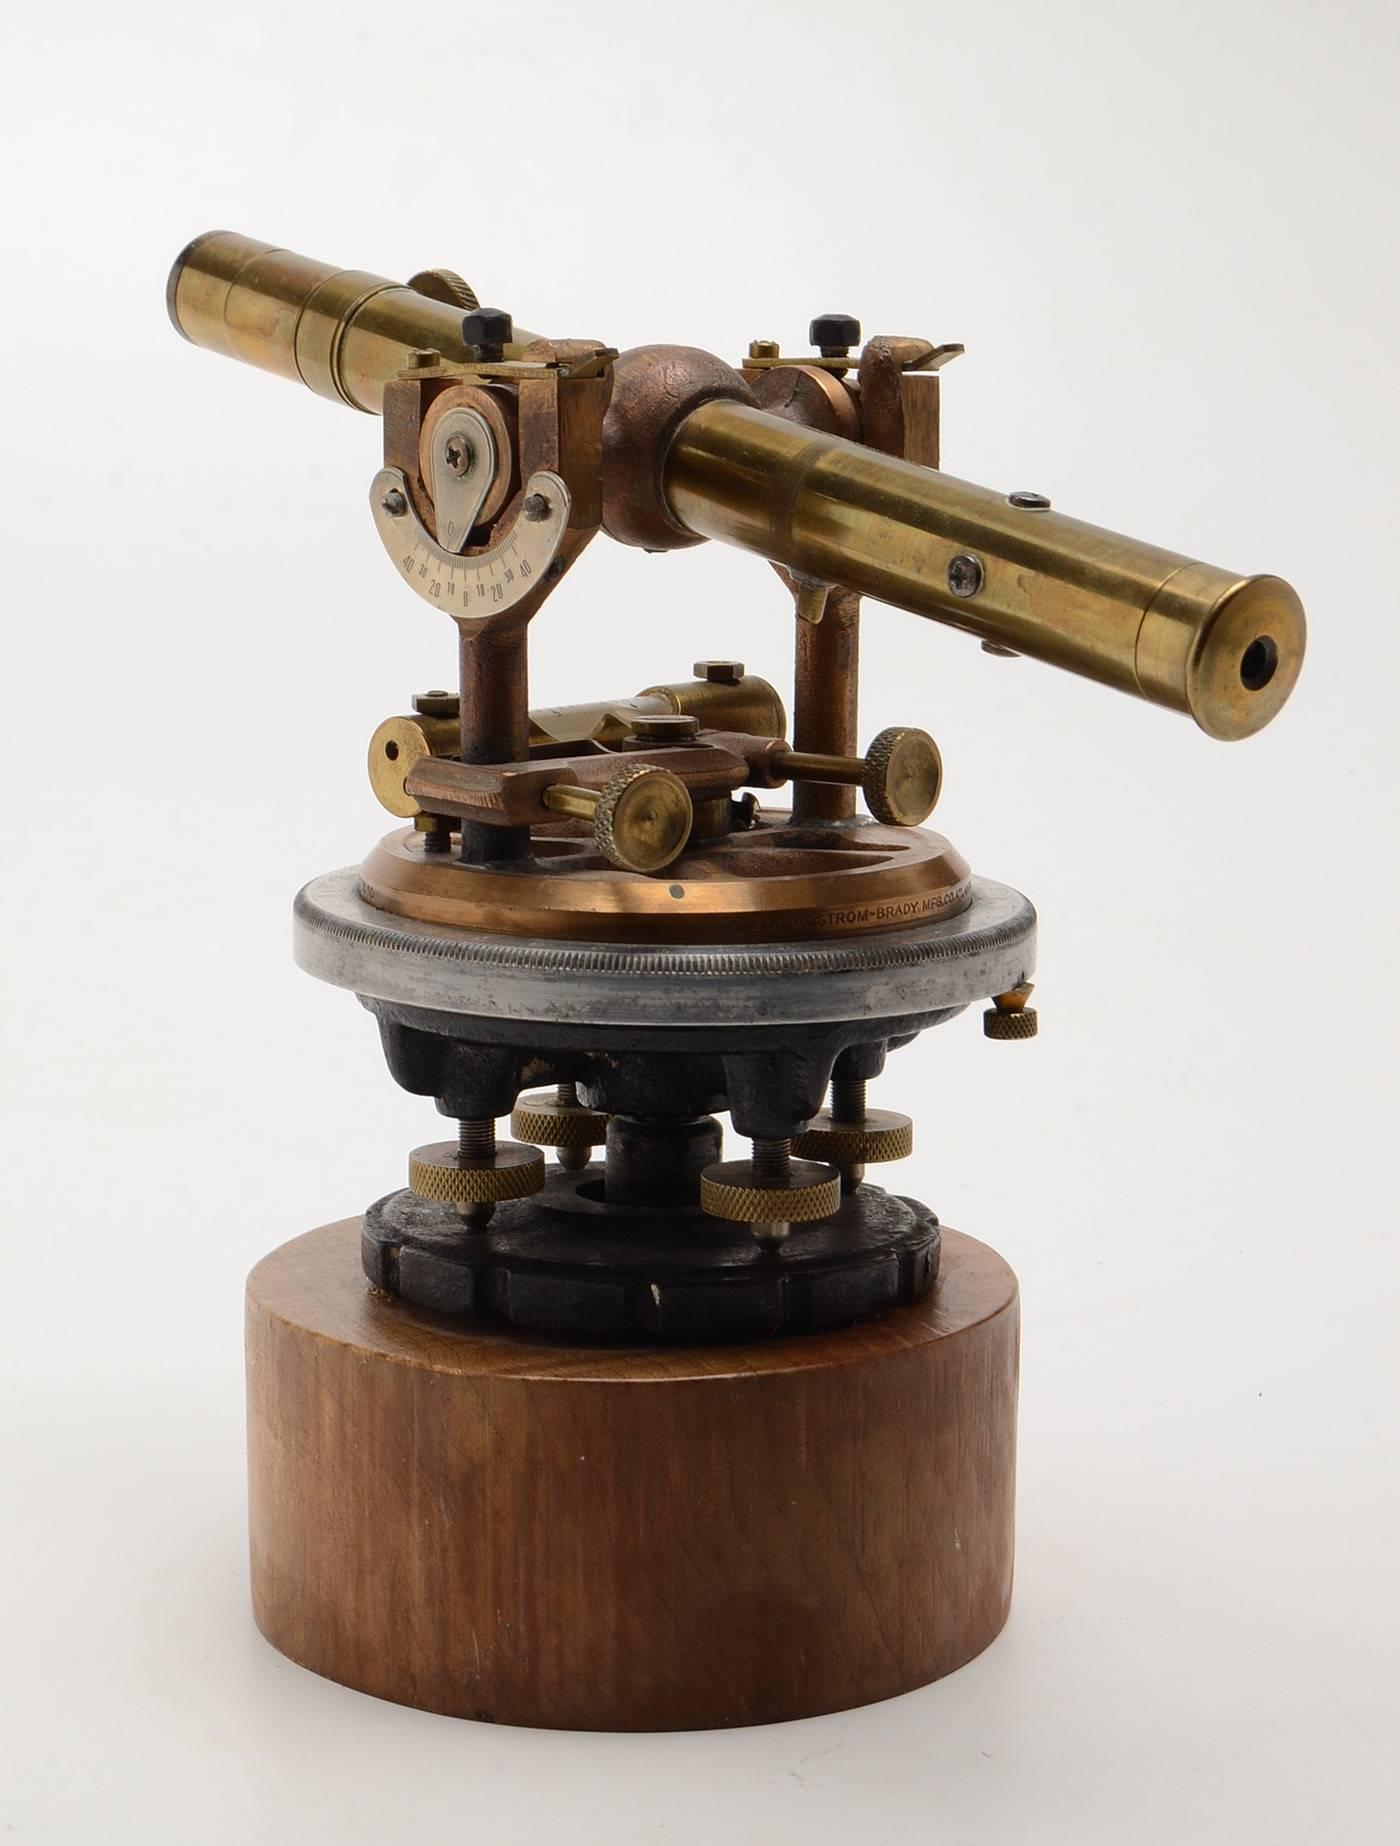 An antique brass surveyor’s transit, mounted to a curly maple plinth base  Manufactured by Bostrum-Brady  Marked “MFD By Bostrum-Brady Mfg Co., Atlanta, GA”   In very good working condition.

Ernst Alfred Bostrom (1855-1923) was a Swedish immigrant